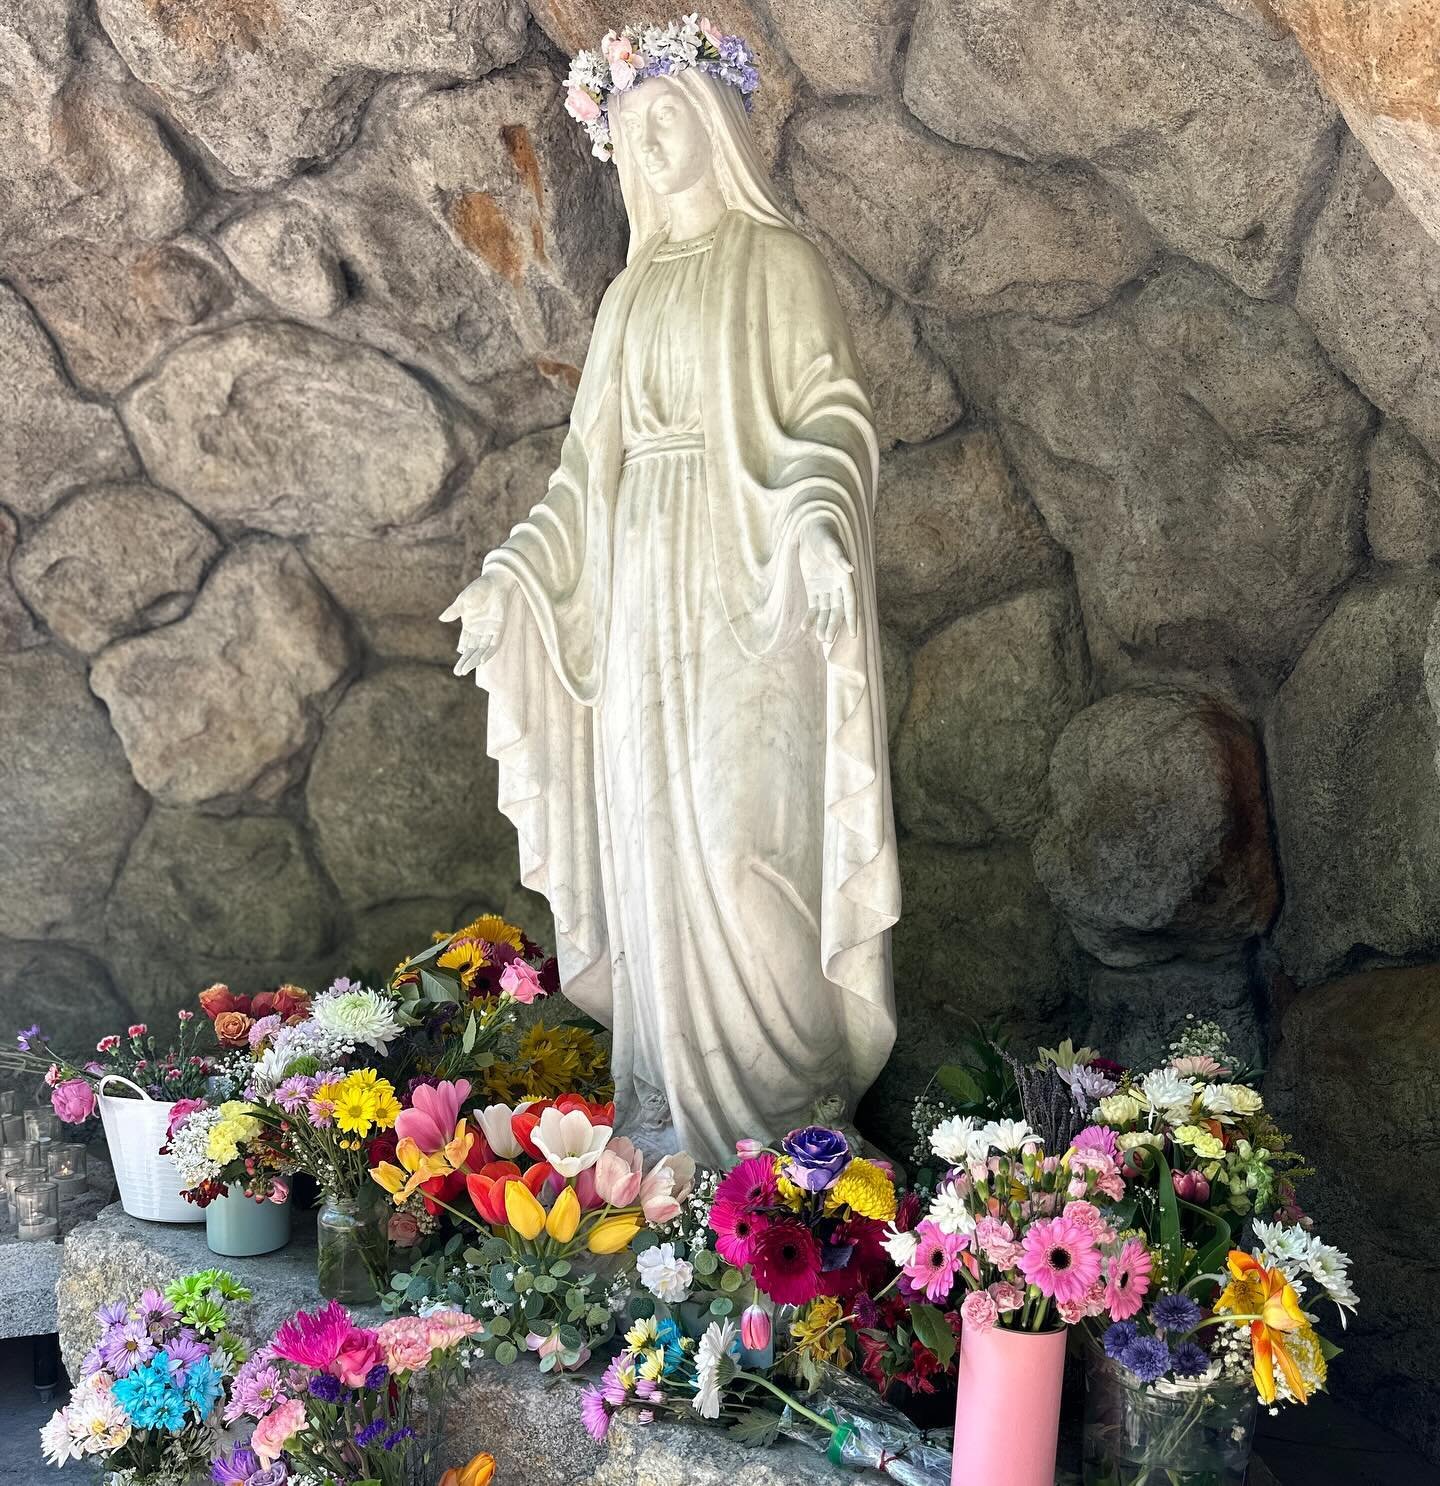 We celebrated all mothers, all grandmothers, and all mother figures at our Marian Mass at St. Al&rsquo;s Church this week. We are thankful for all of you and how you have touched our lives!  Thank you to our 6th graders for leading us in this honored